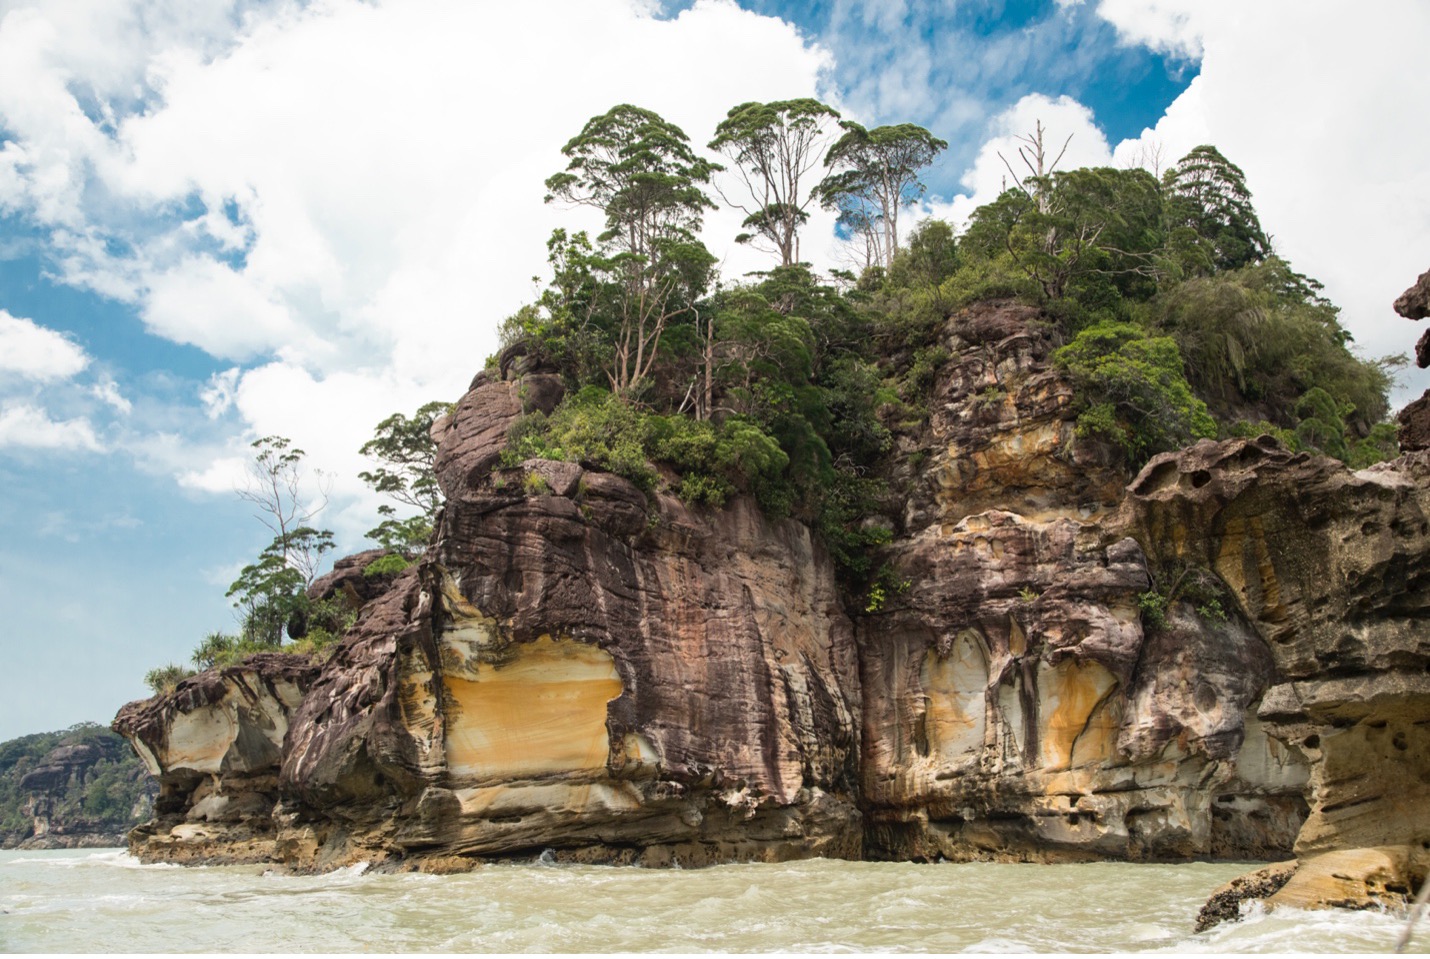 The limestone cliffs of Bako National park tower over the boat